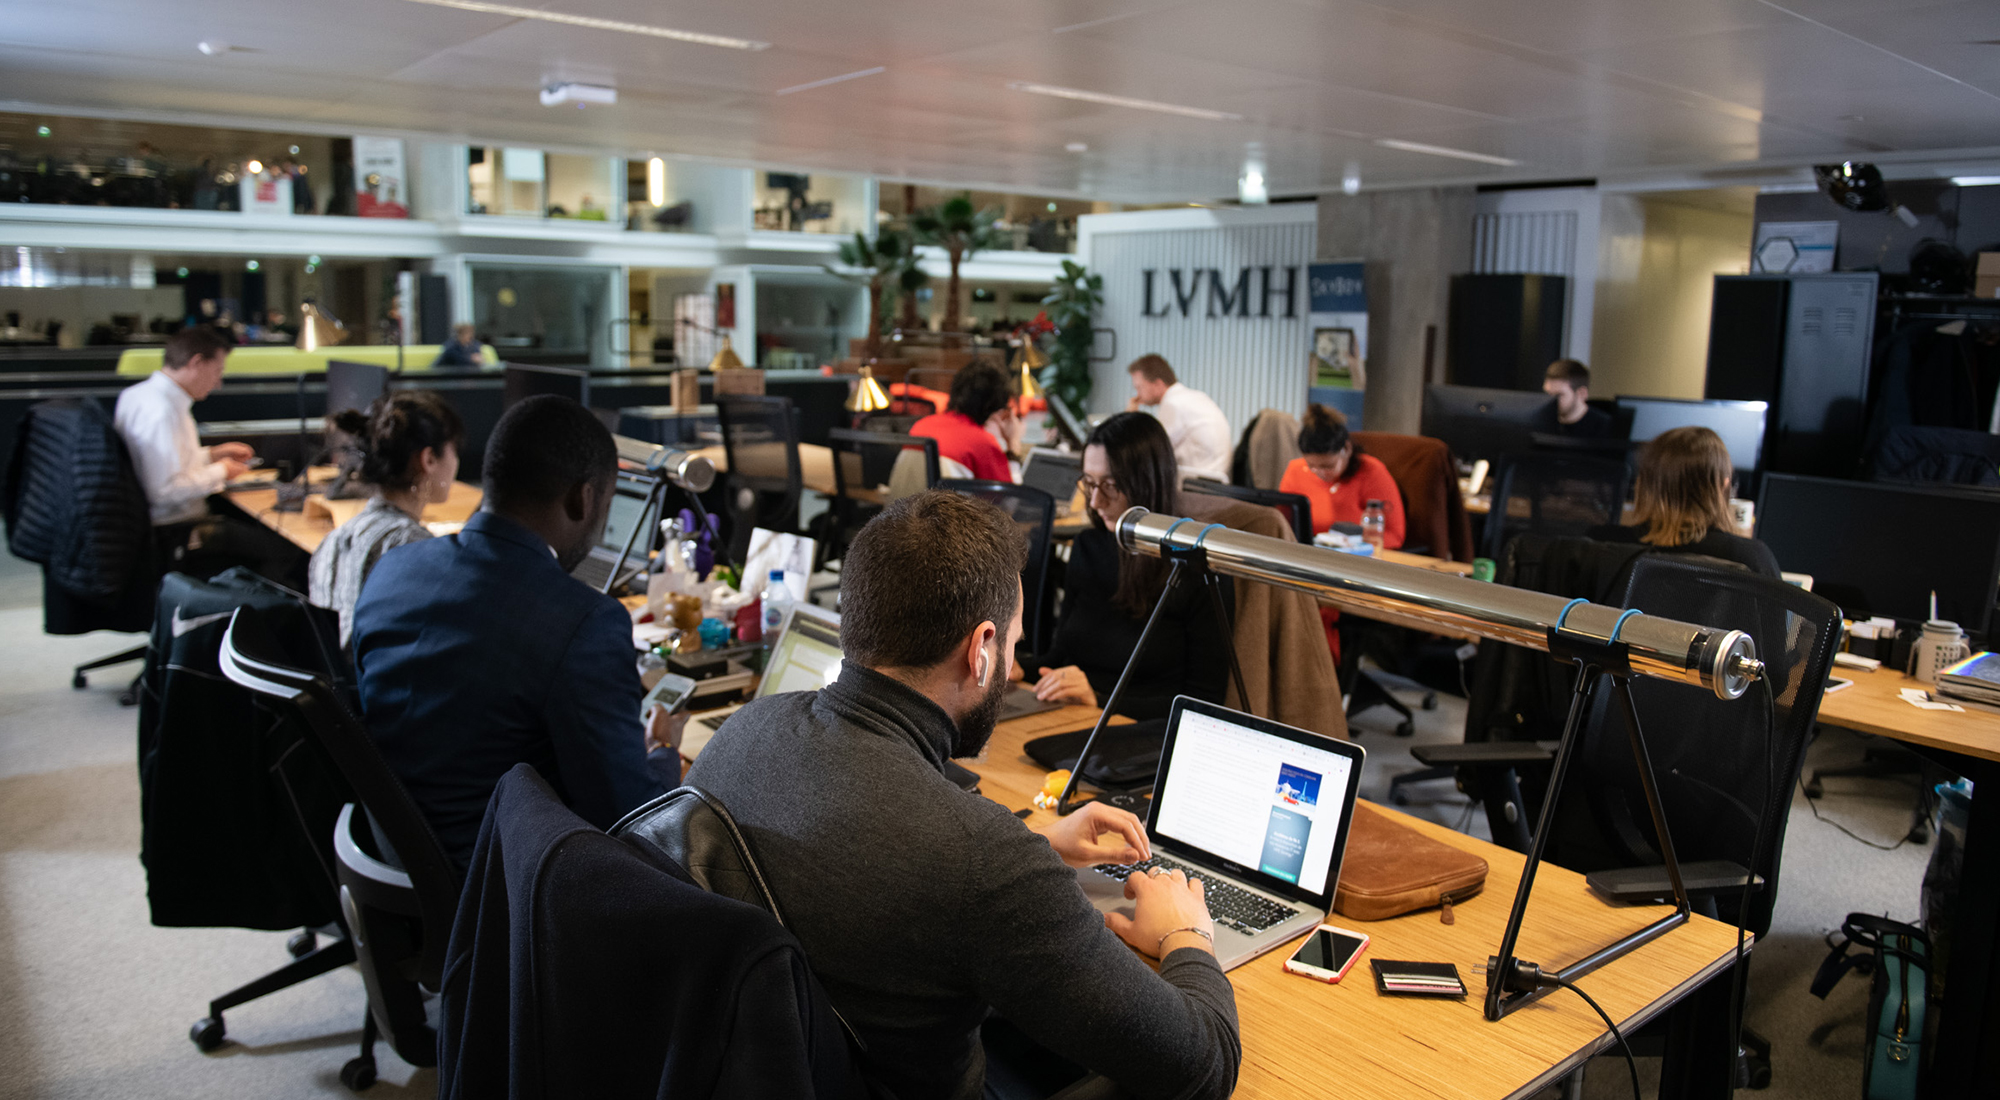 LVMH welcomes the second season of startups at its La Maison des Startups incubator at Station F ...